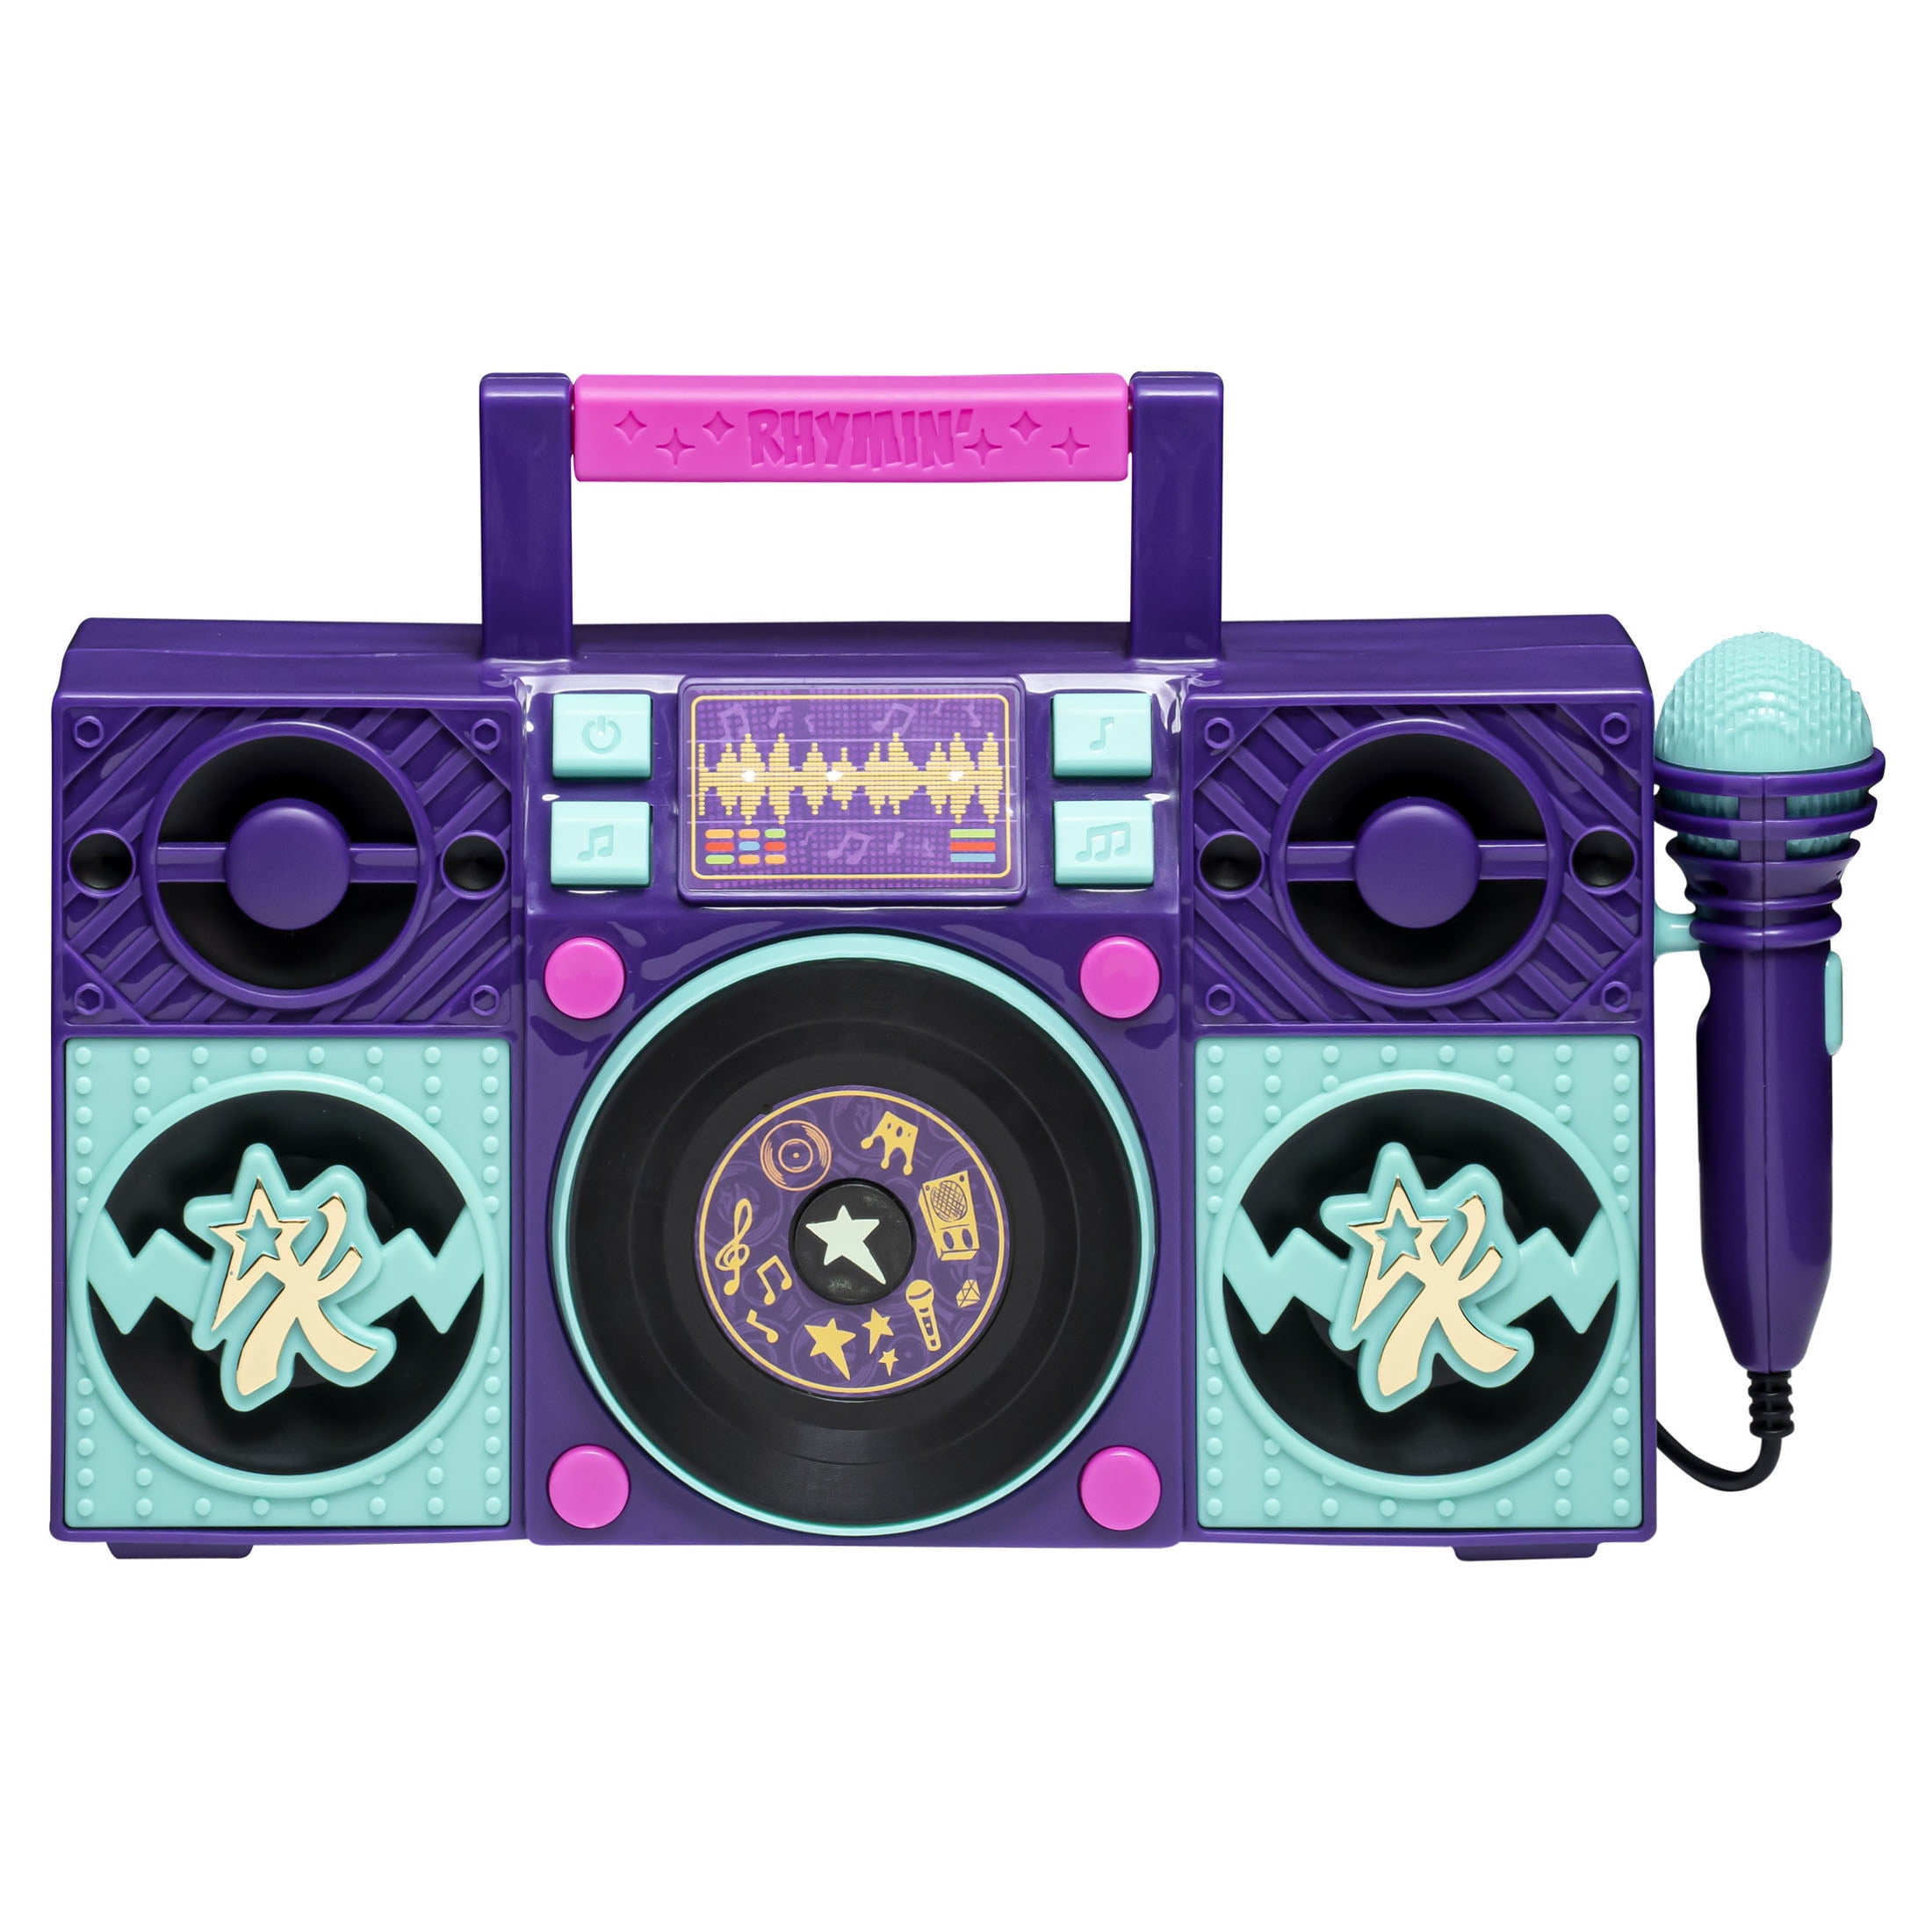 Karma's World Sing Along Boombox with a Real Working Microphone, Flashing Light Show, and Built-in Music from the Show.